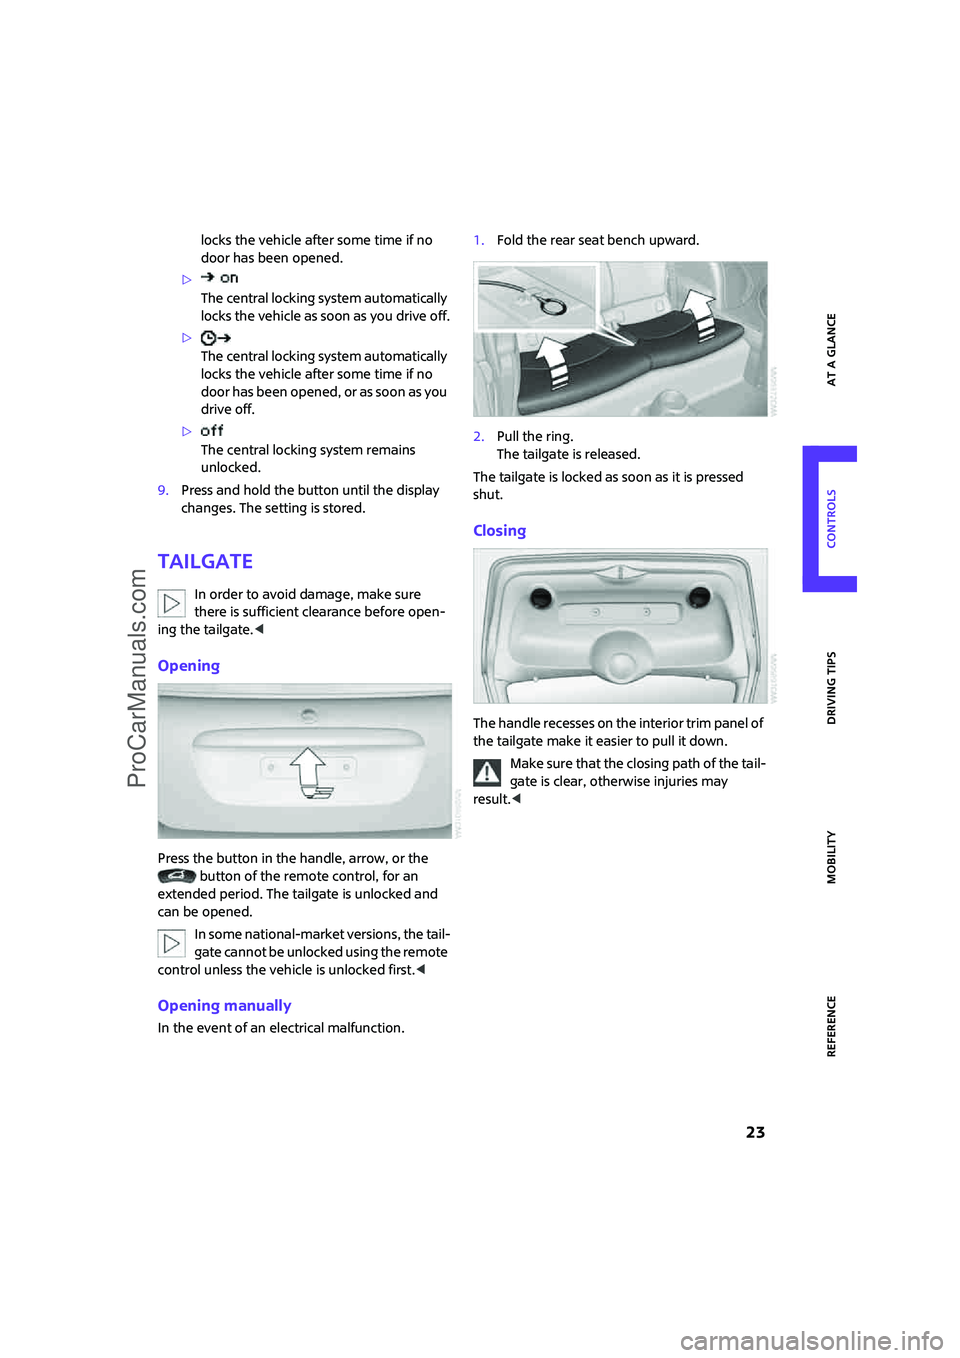 MINI COOPER 2007  Owners Manual ReferenceAt a glance Controls Driving tips Mobility
 23
locks the vehicle after some time if no 
door has been opened.
>
The central locking system automatically 
locks the vehicle as soon as you driv